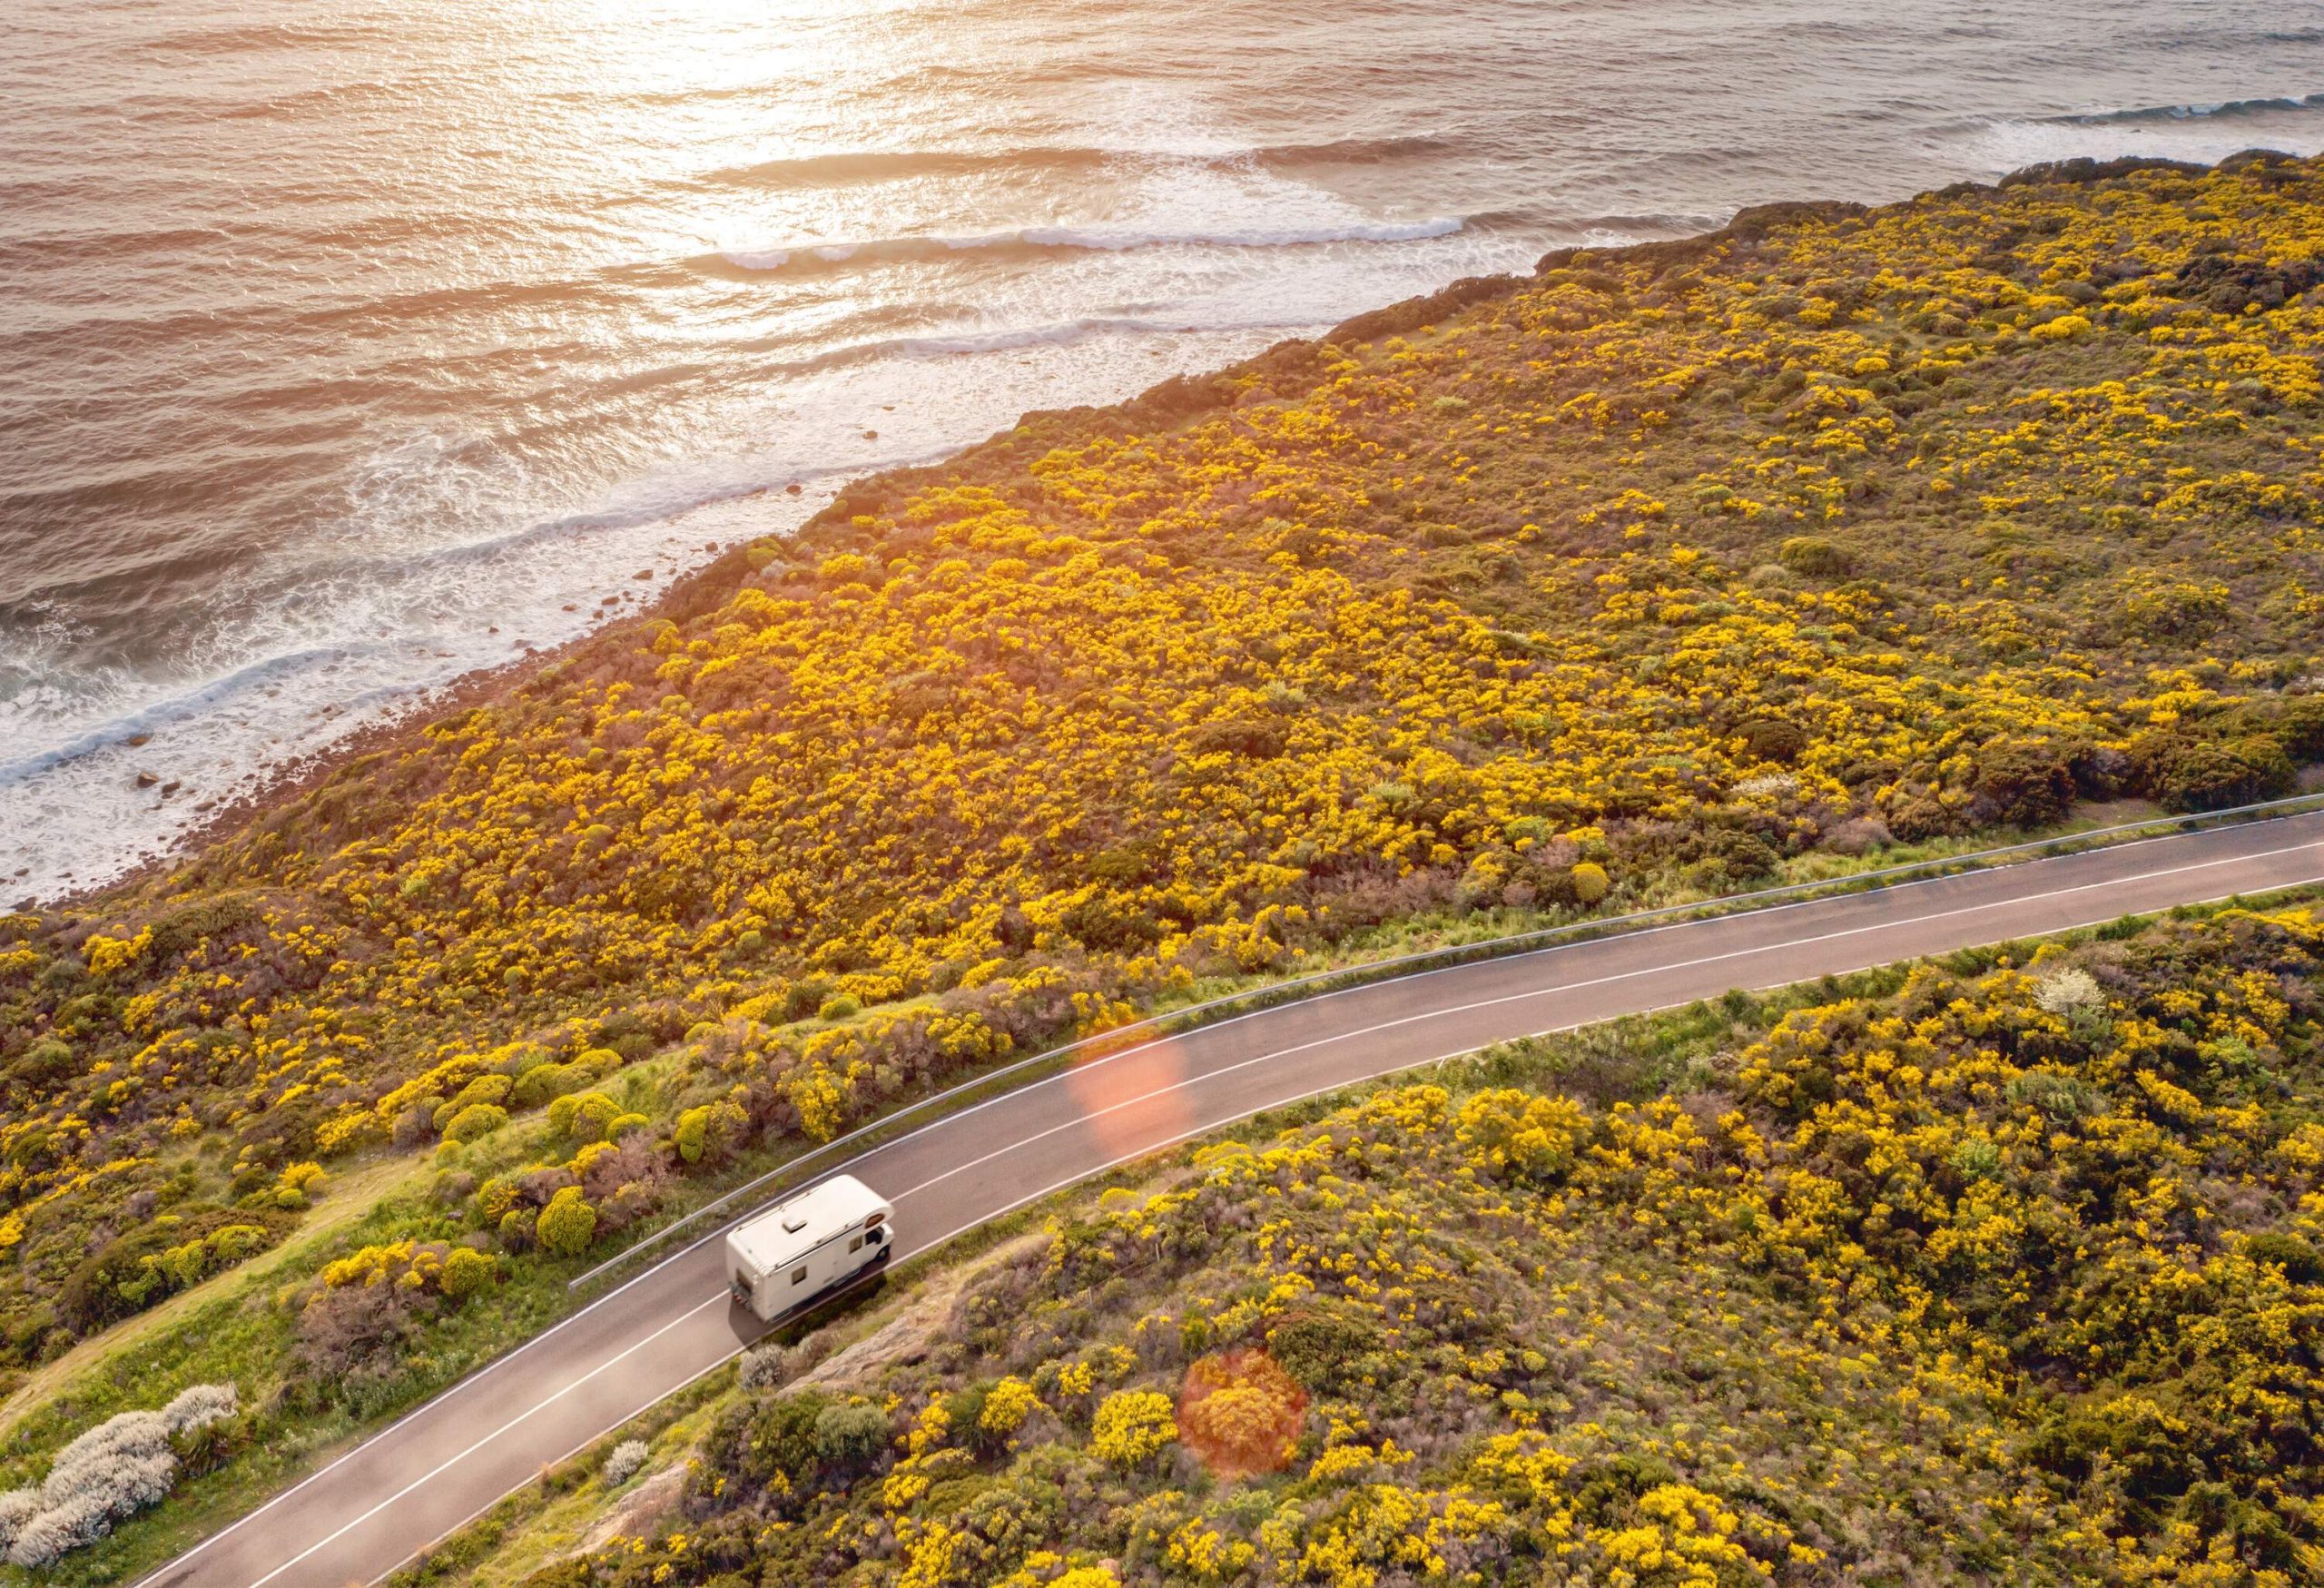 A camper van travelling down a road through a shrubland by the beach.